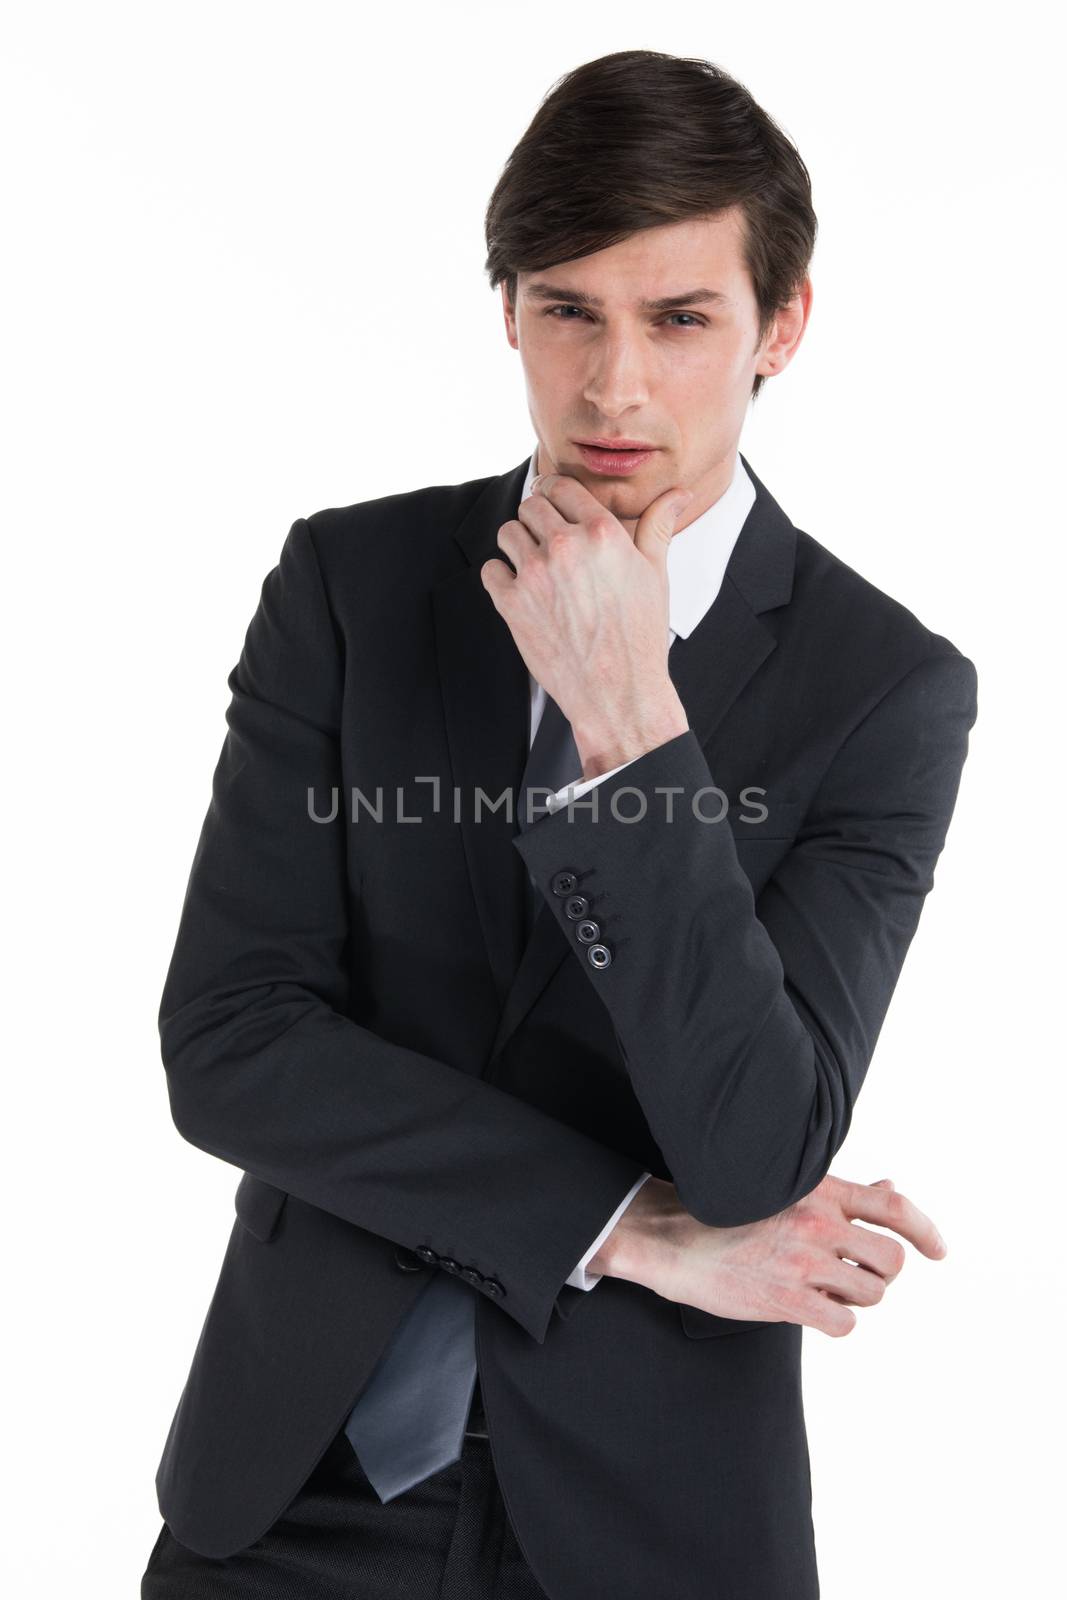 Frowning business man thinking over serious decision. Confident young man in formal suit touching chin